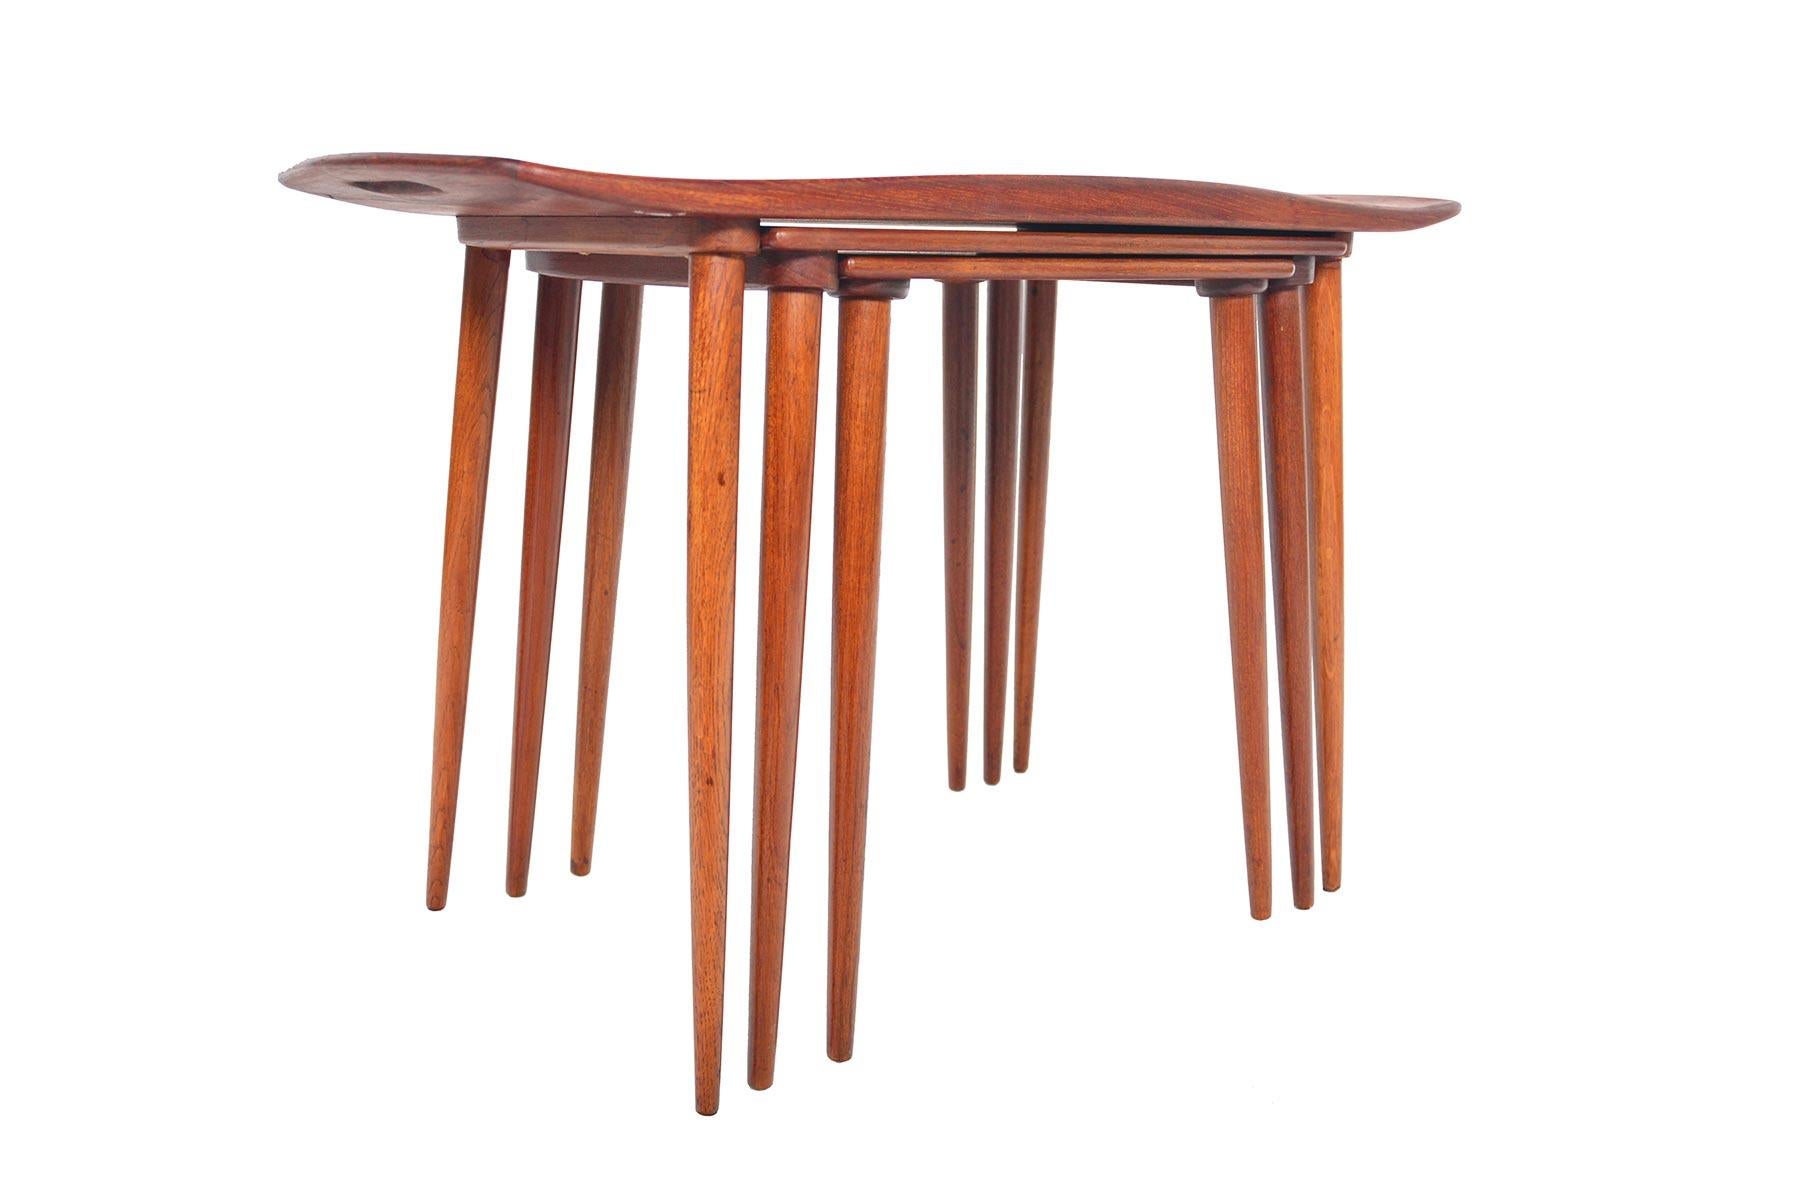 This rare set of Jens Quistgaard nesting tables is crafted in teak. Exterior table offers raised sides with carved handles. All tables stand on teak spindle legs. In excellent condition.